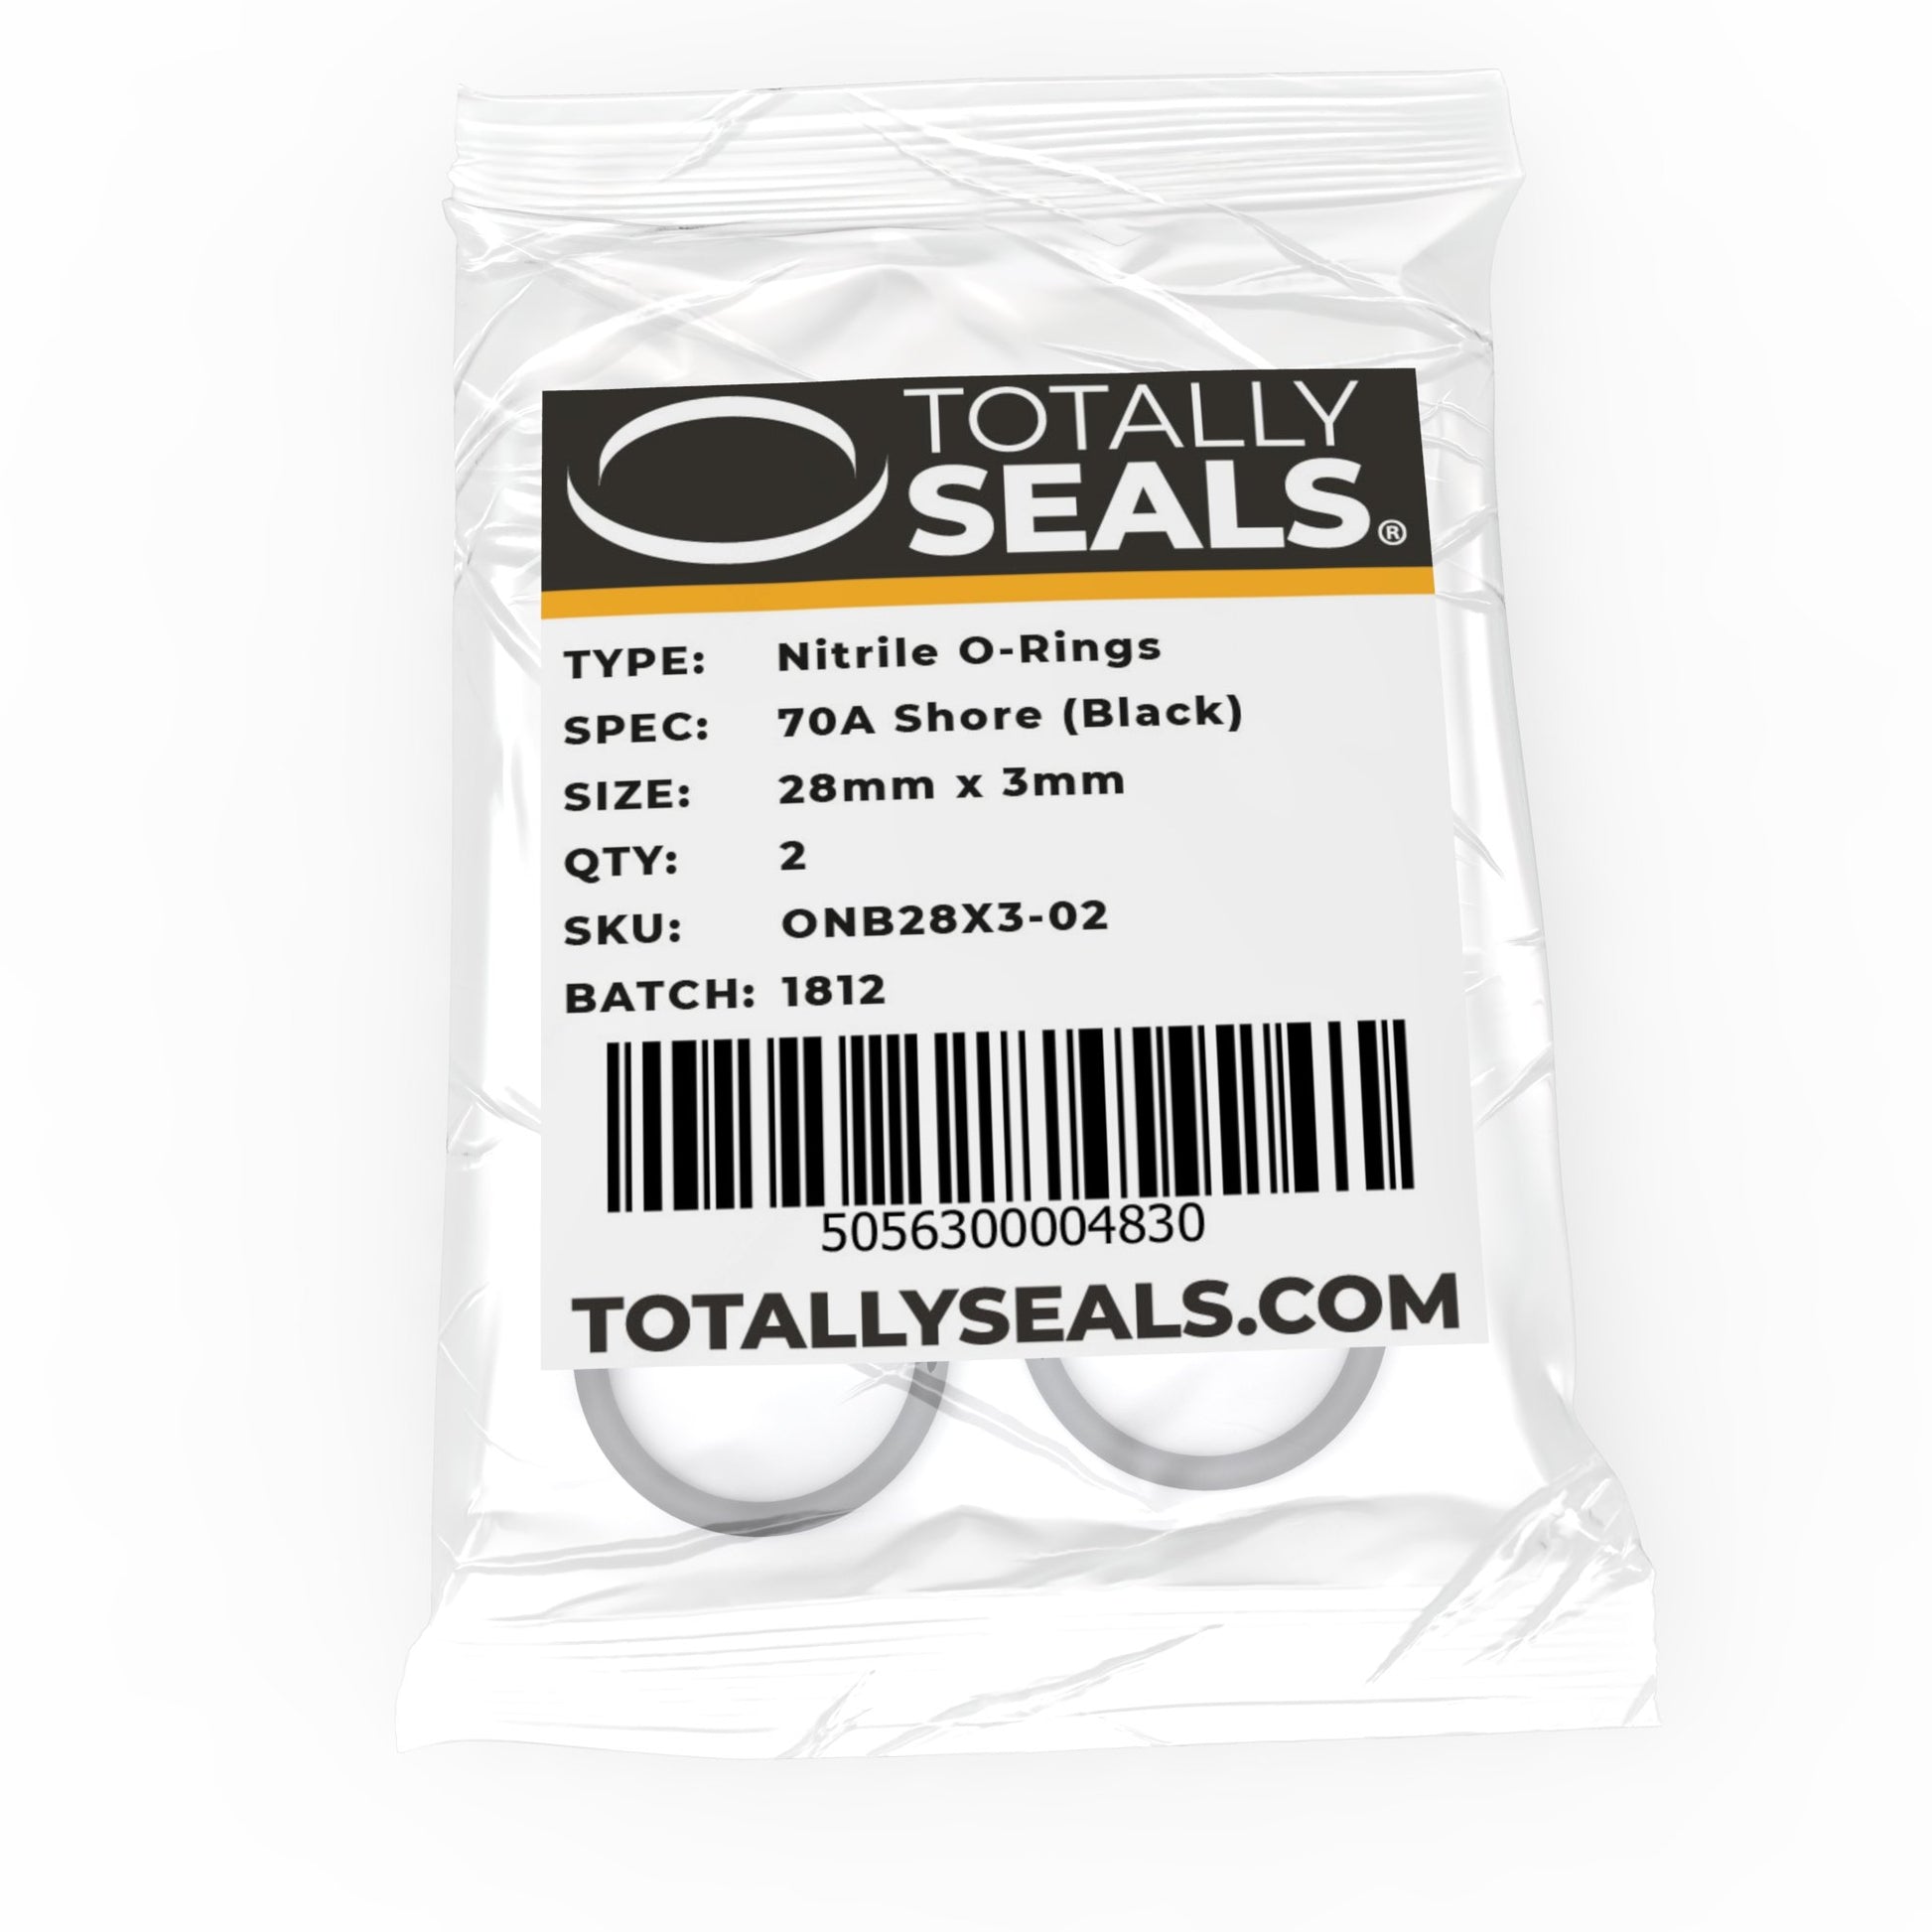 28mm x 3mm (34mm OD) Nitrile O-Rings - Totally Seals®